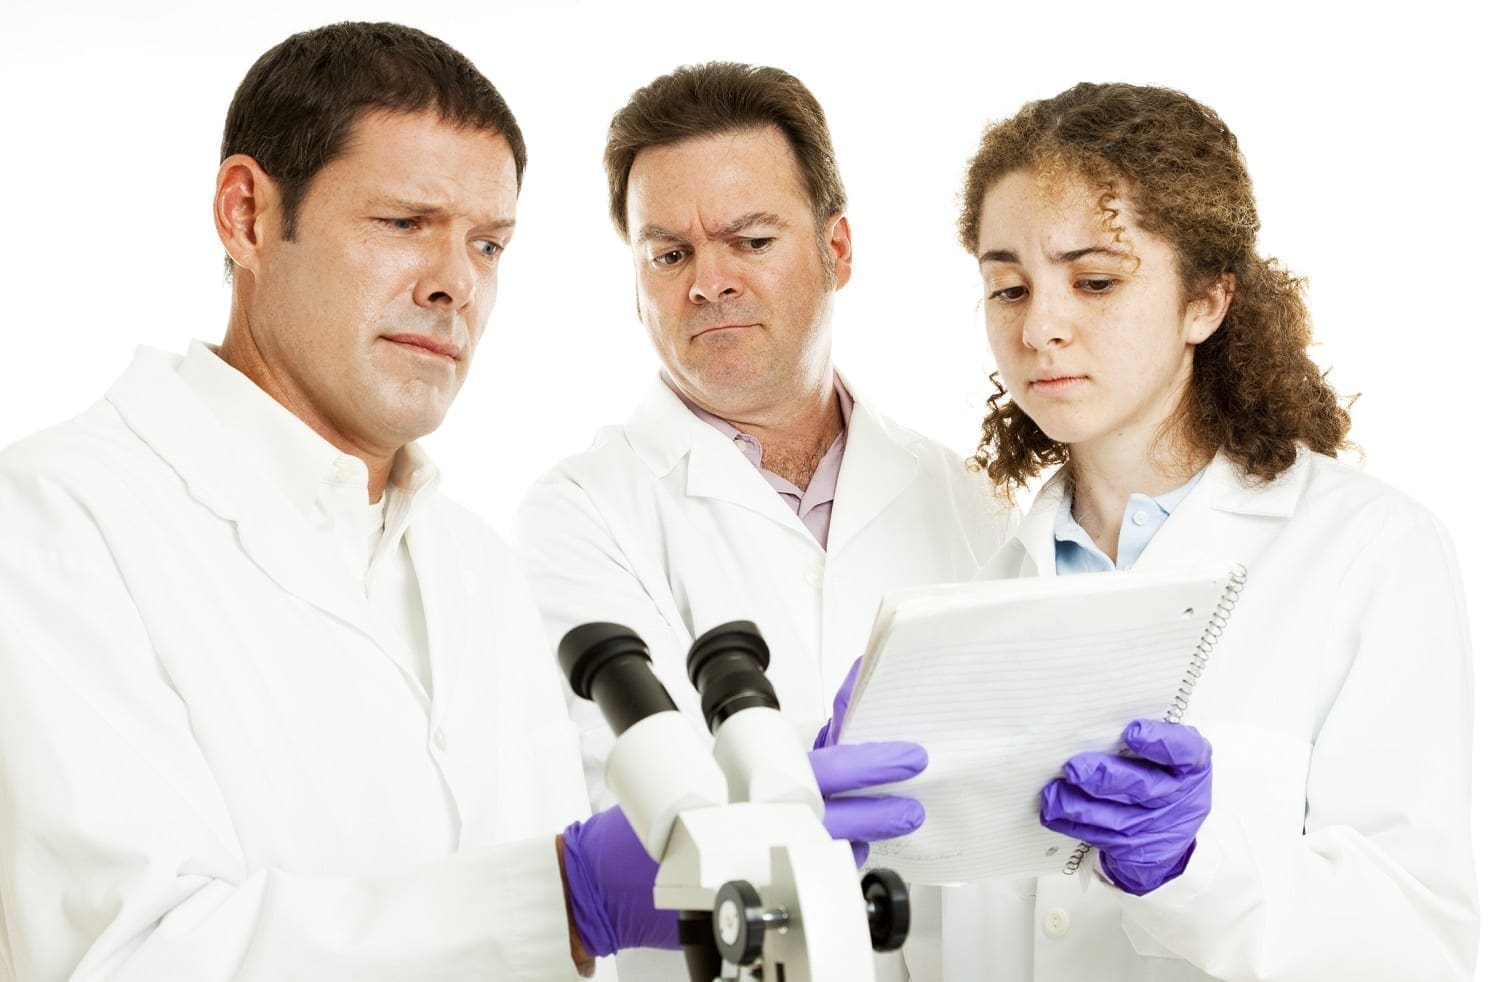 Skeptical Scientists, photo credit: ID 14650030 © Lisa F. Young | Dreamstime.com